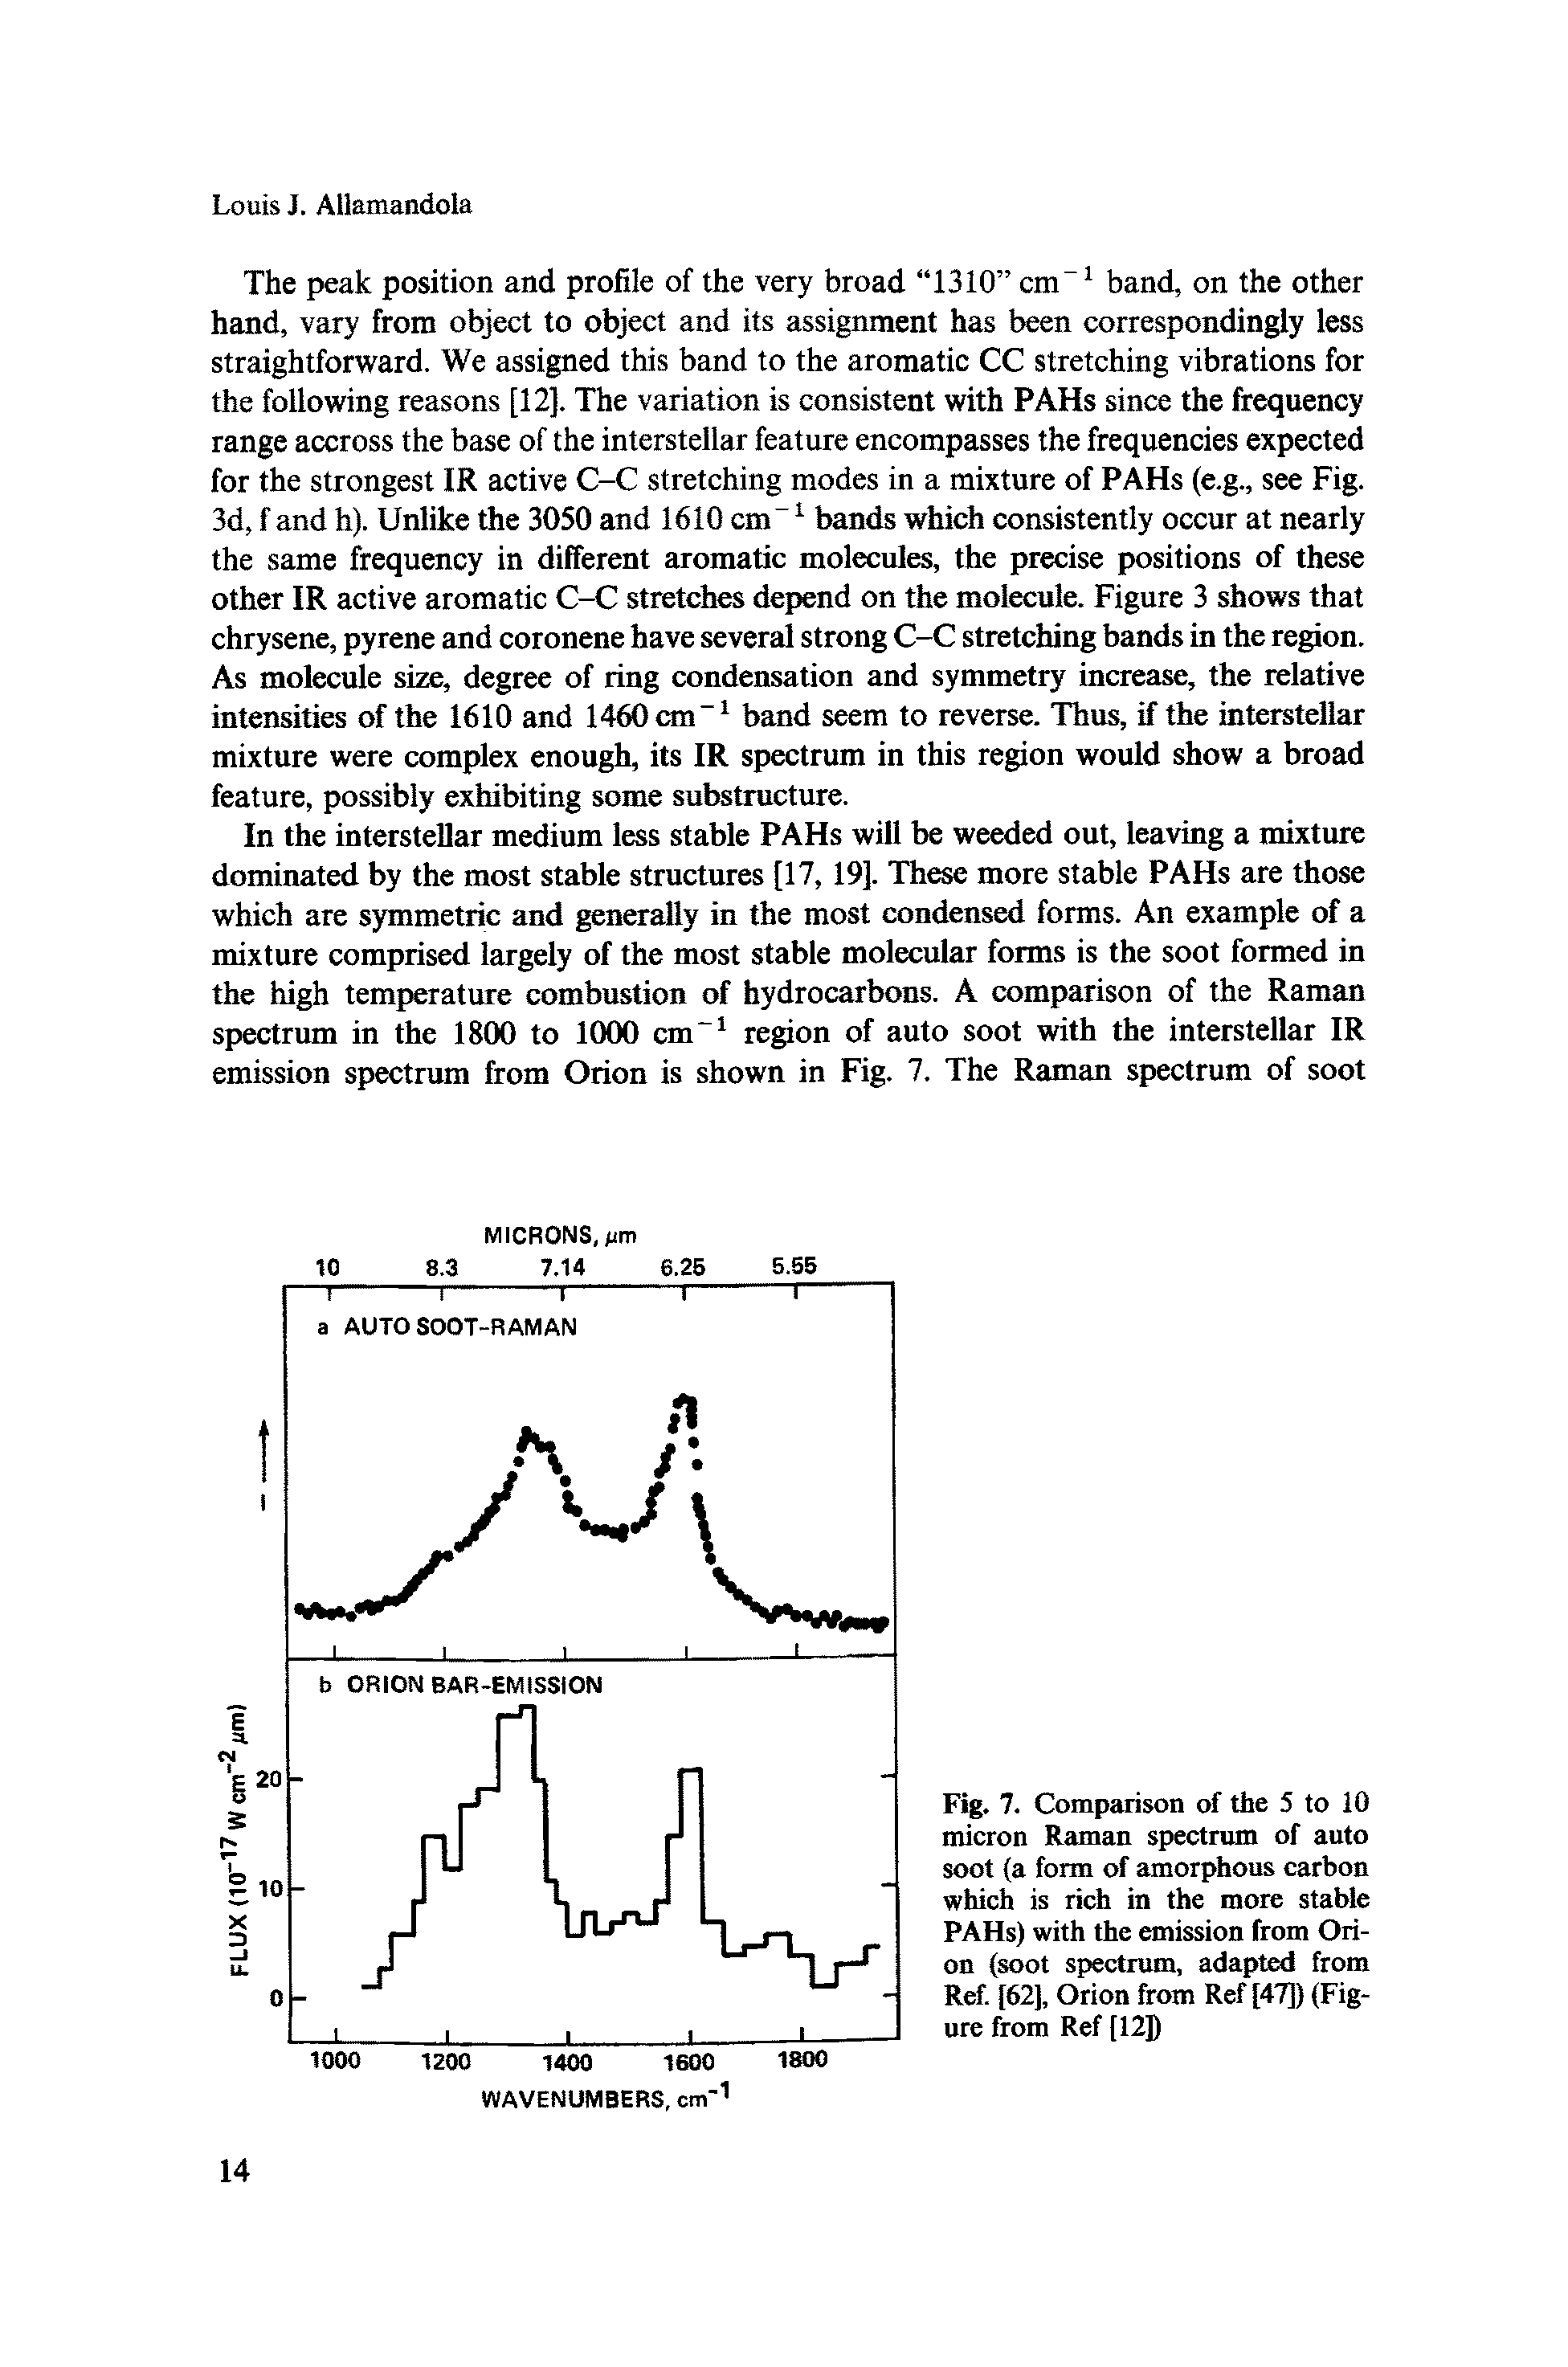 Fig. 7. Comparison of the 5 to 10 micron Raman spectrum of auto soot (a form of amorphous carbon which is rich in the more stable PAHs) with the emission from Orion (soot spectrum, adapted from Ref. [62], Orion from Ref [47]) (Figure from Ref [12])...